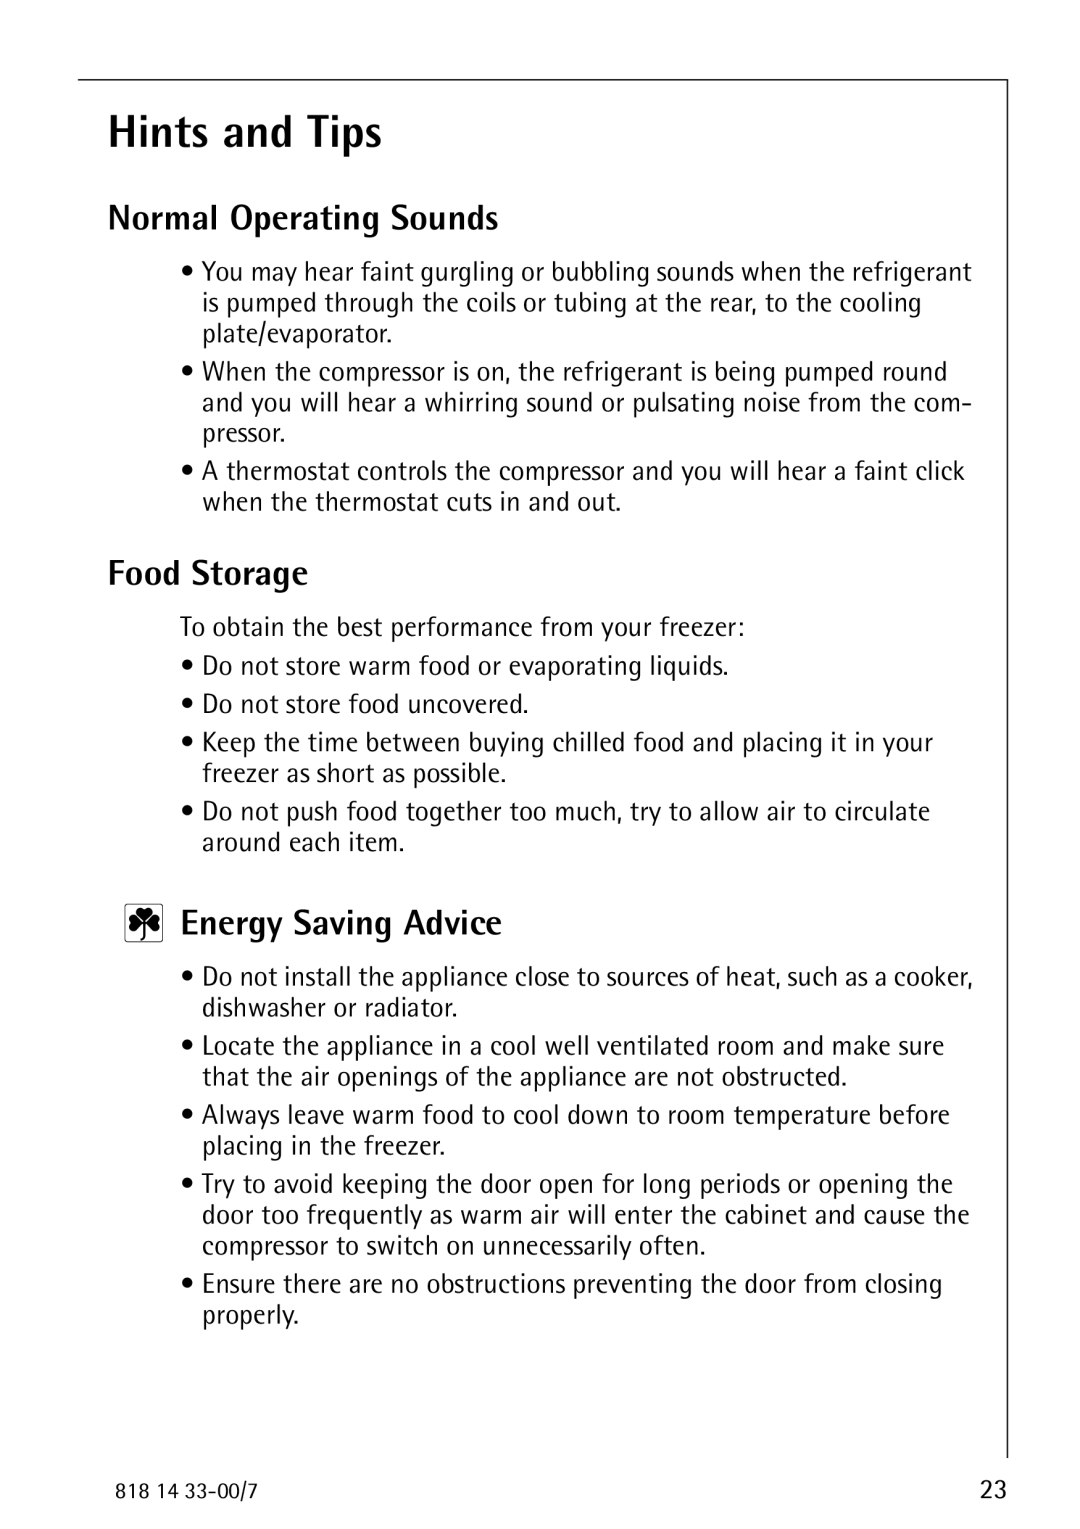 Electrolux 2170-4 operating instructions Hints and Tips, Normal Operating Sounds, Food Storage, Energy Saving Advice 